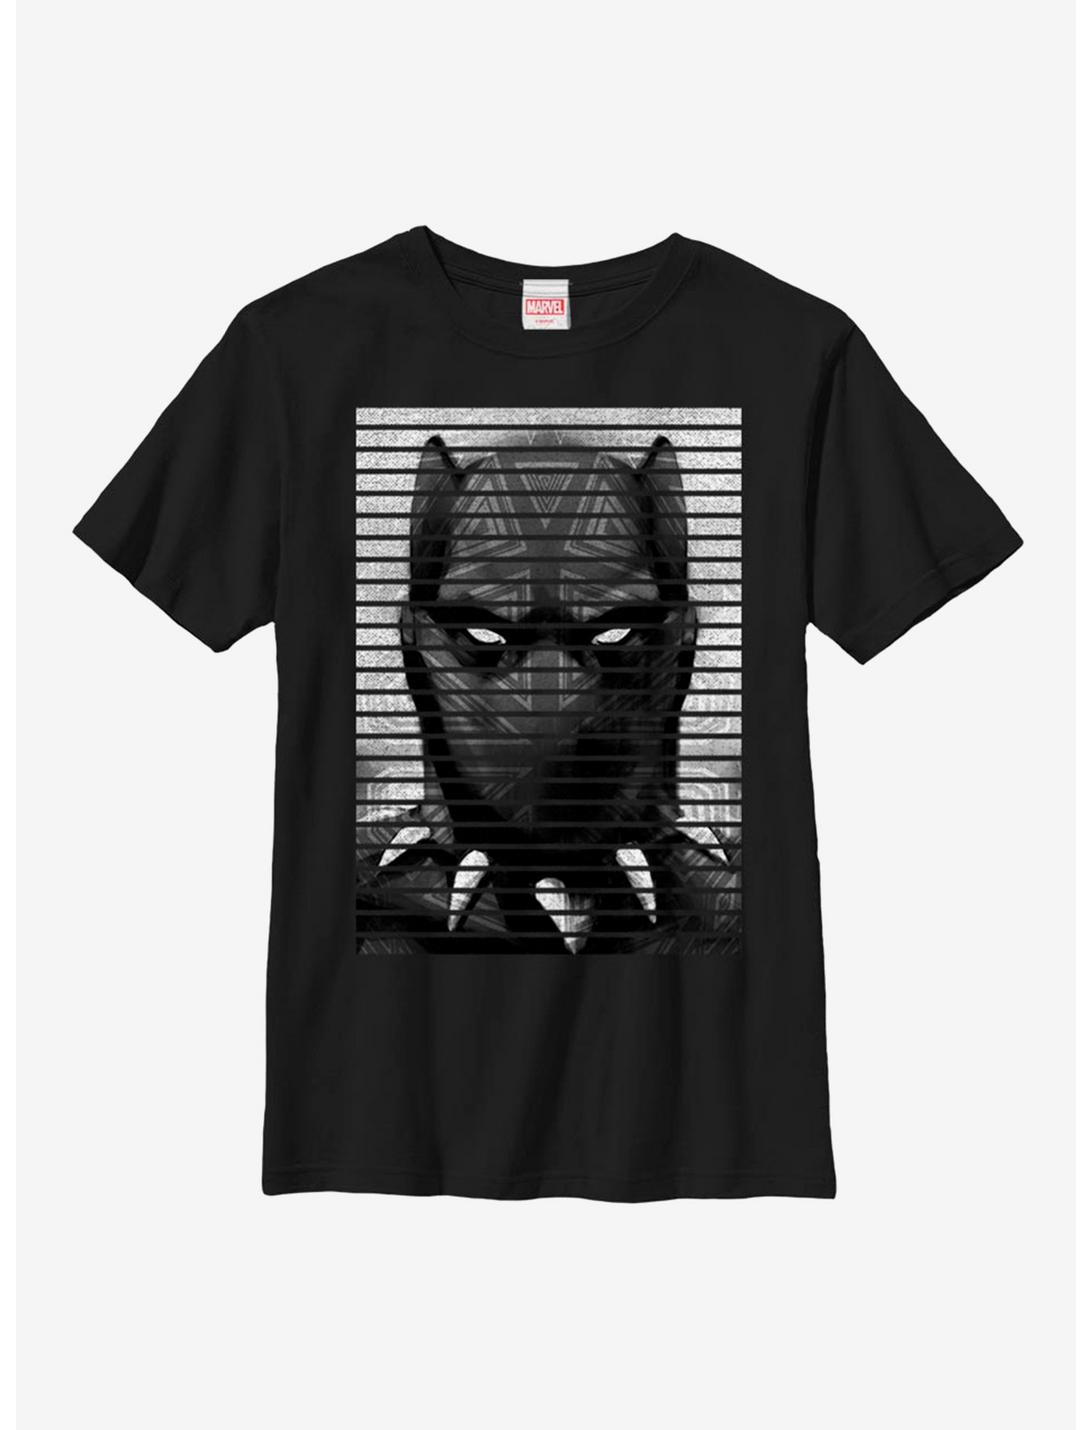 Marvel Black Panther Only One Youth T-Shirt, BLACK, hi-res